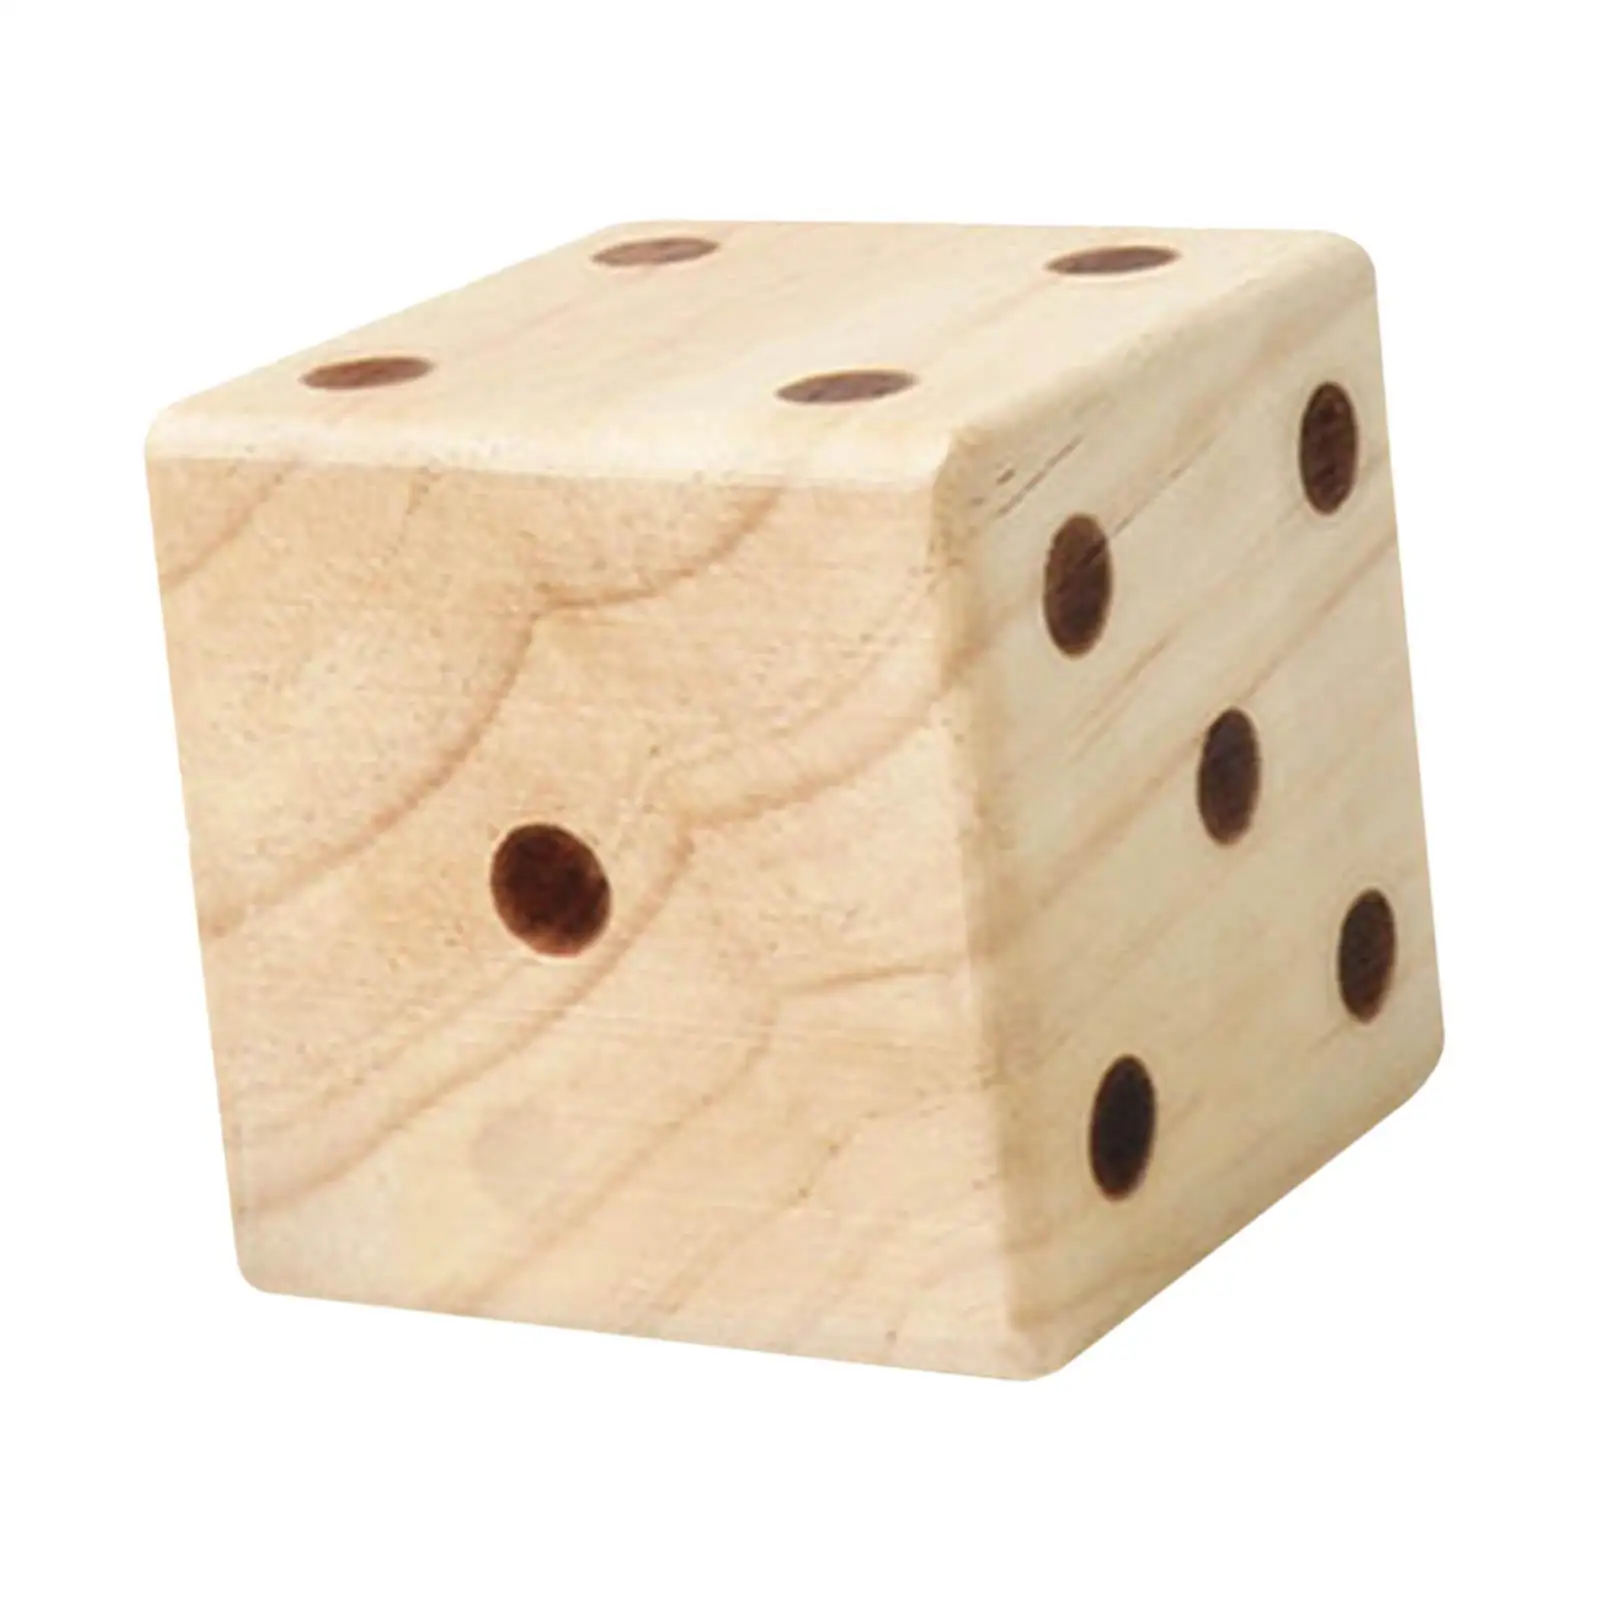 Large Wooden Yard Dice 7cm Smooth Edge Lightweight Role Playing Dice for Game Lawn Sports Equipment Yard Outdoor